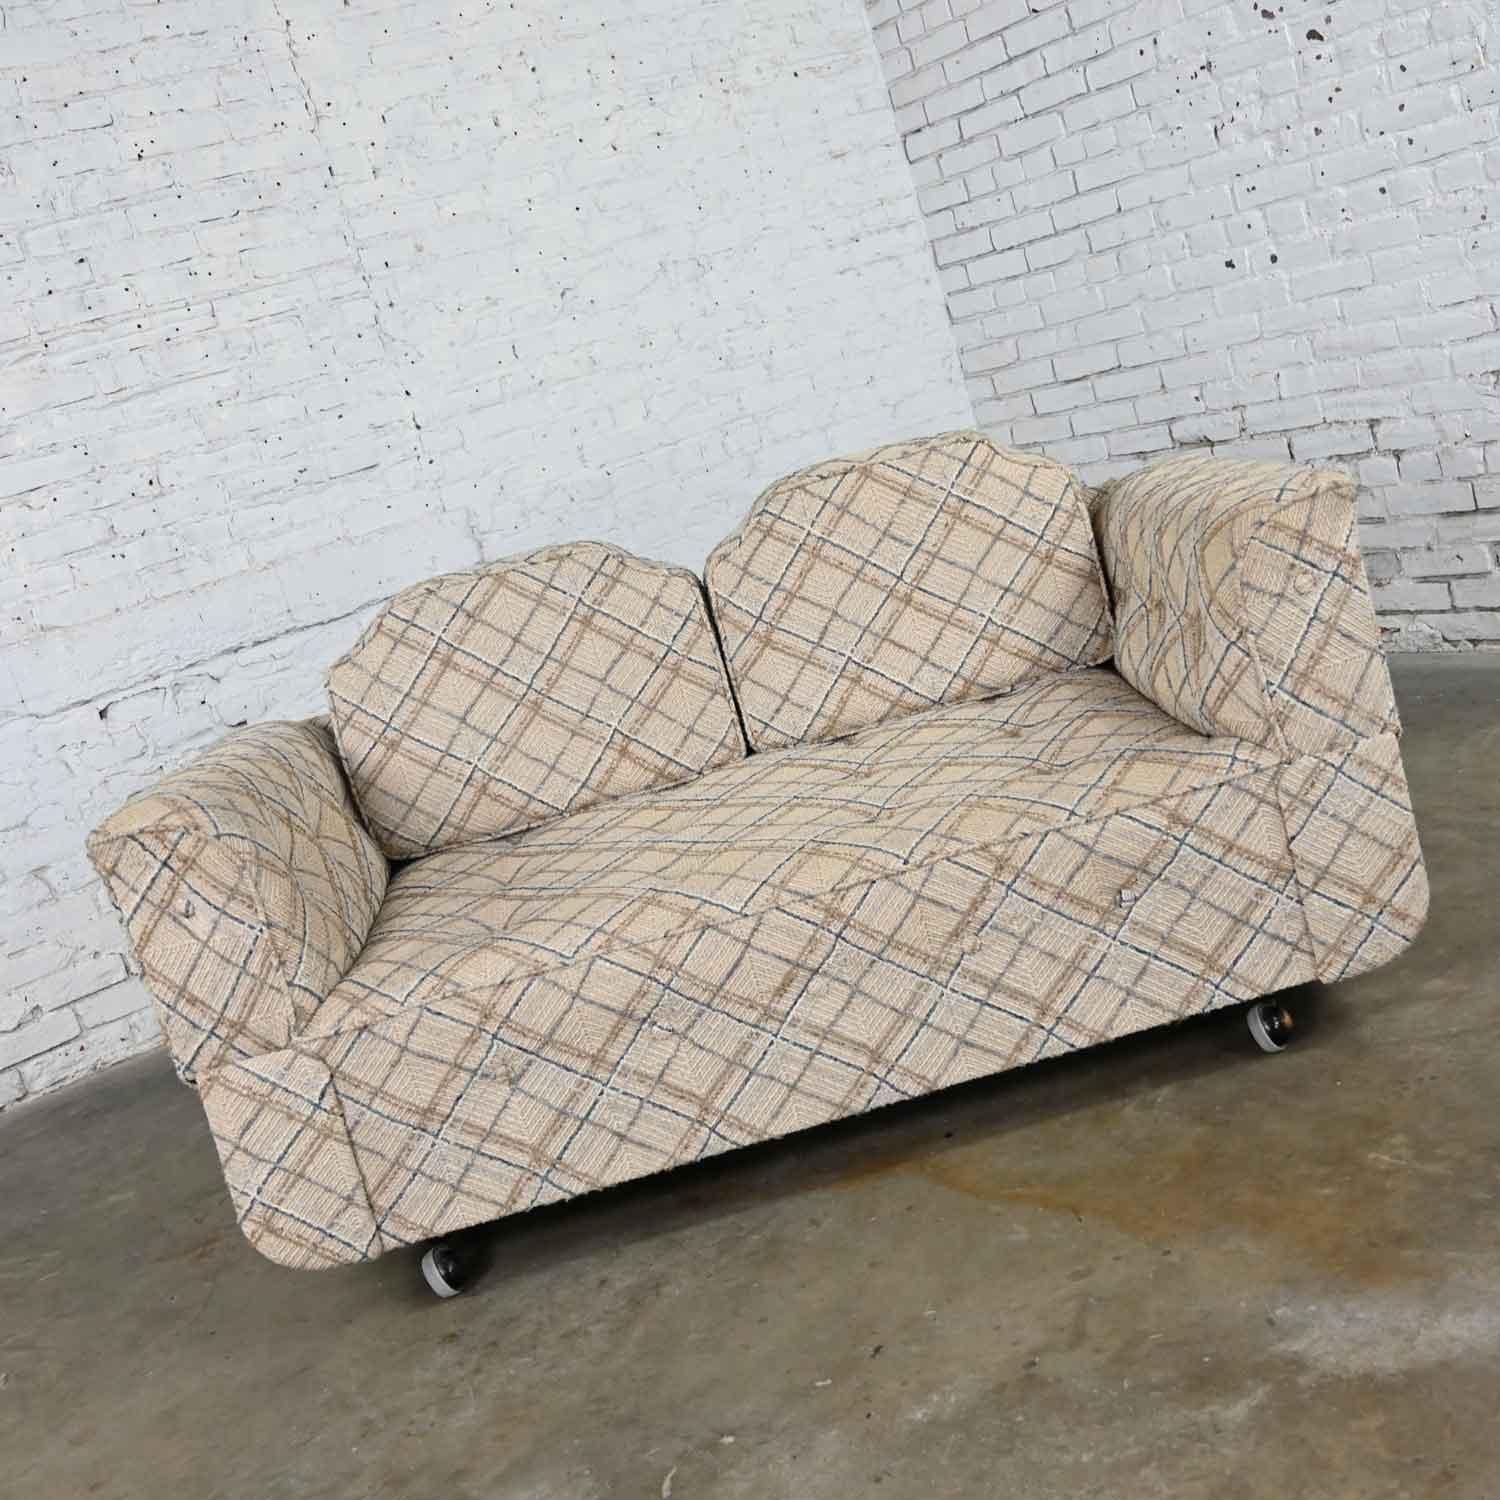 Wonderful convertible love seat sofa, daybed or chaise with casters in the front and tapered wood legs in the back and blue and brown on oatmeal colored base plaid pattern fabric. Beautiful condition, keeping in mind that this is vintage and not new